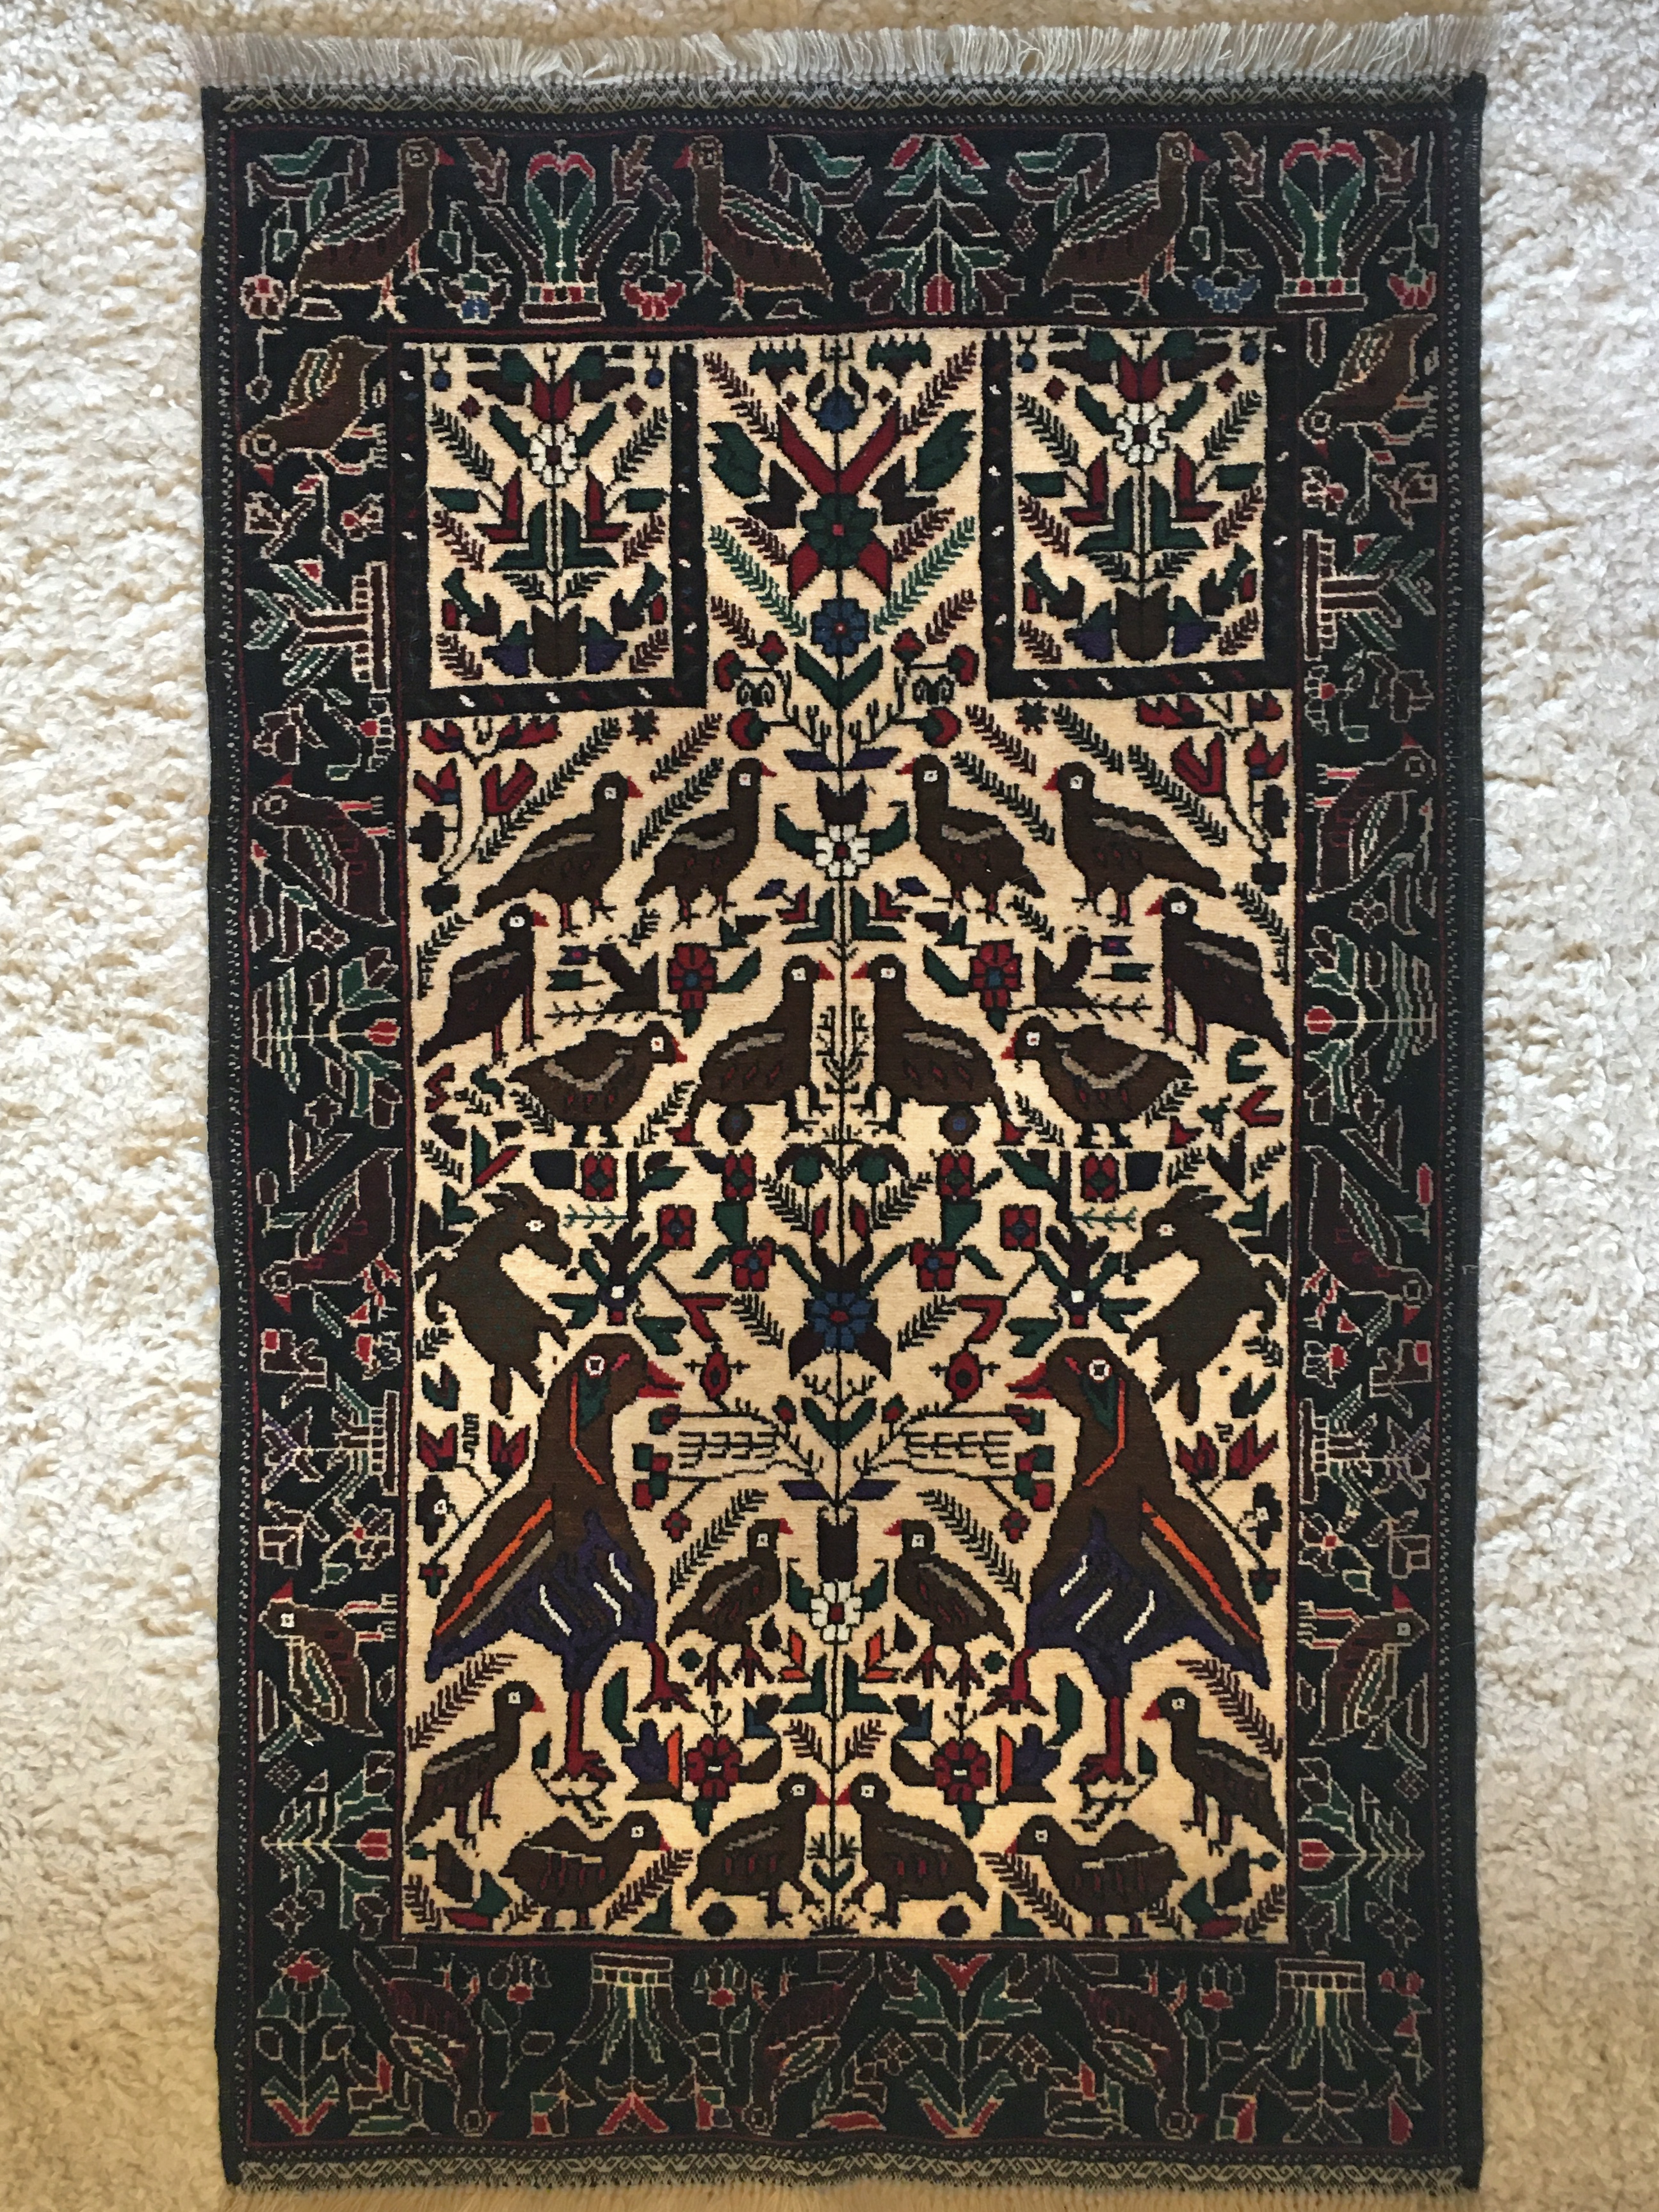 A prayer rug featuring many birds as well as fringed tree branches and other geometric floral patterns